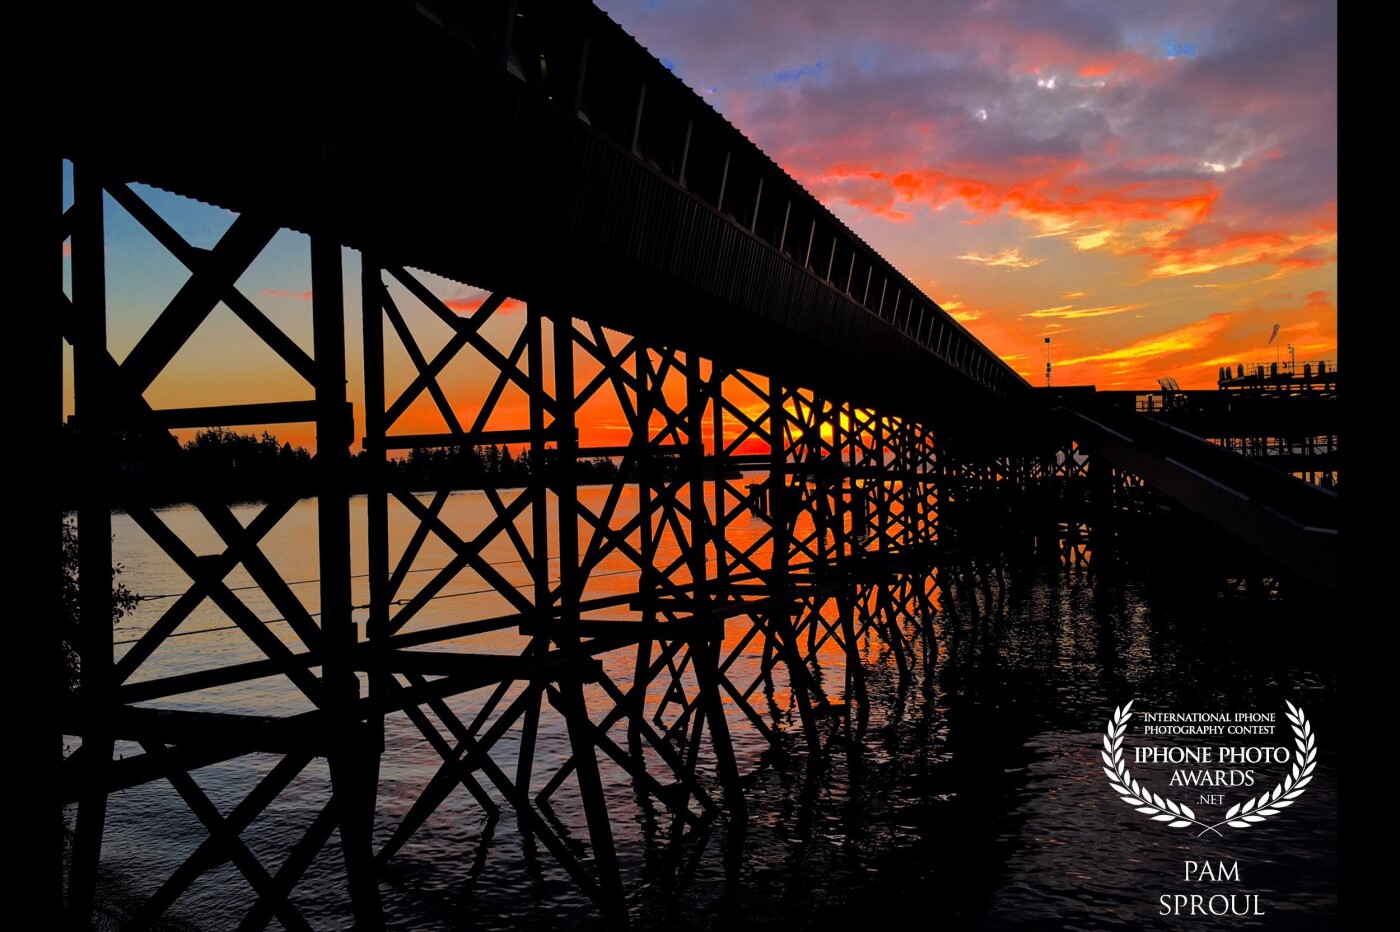 The passenger ramp leading to the Bainbridge Island ferry was lit up that morning and the color reflections through the structural supports were very intriguing.  Gorgeous sky <br />
“Ferry landing Sky”<br />
<br />
